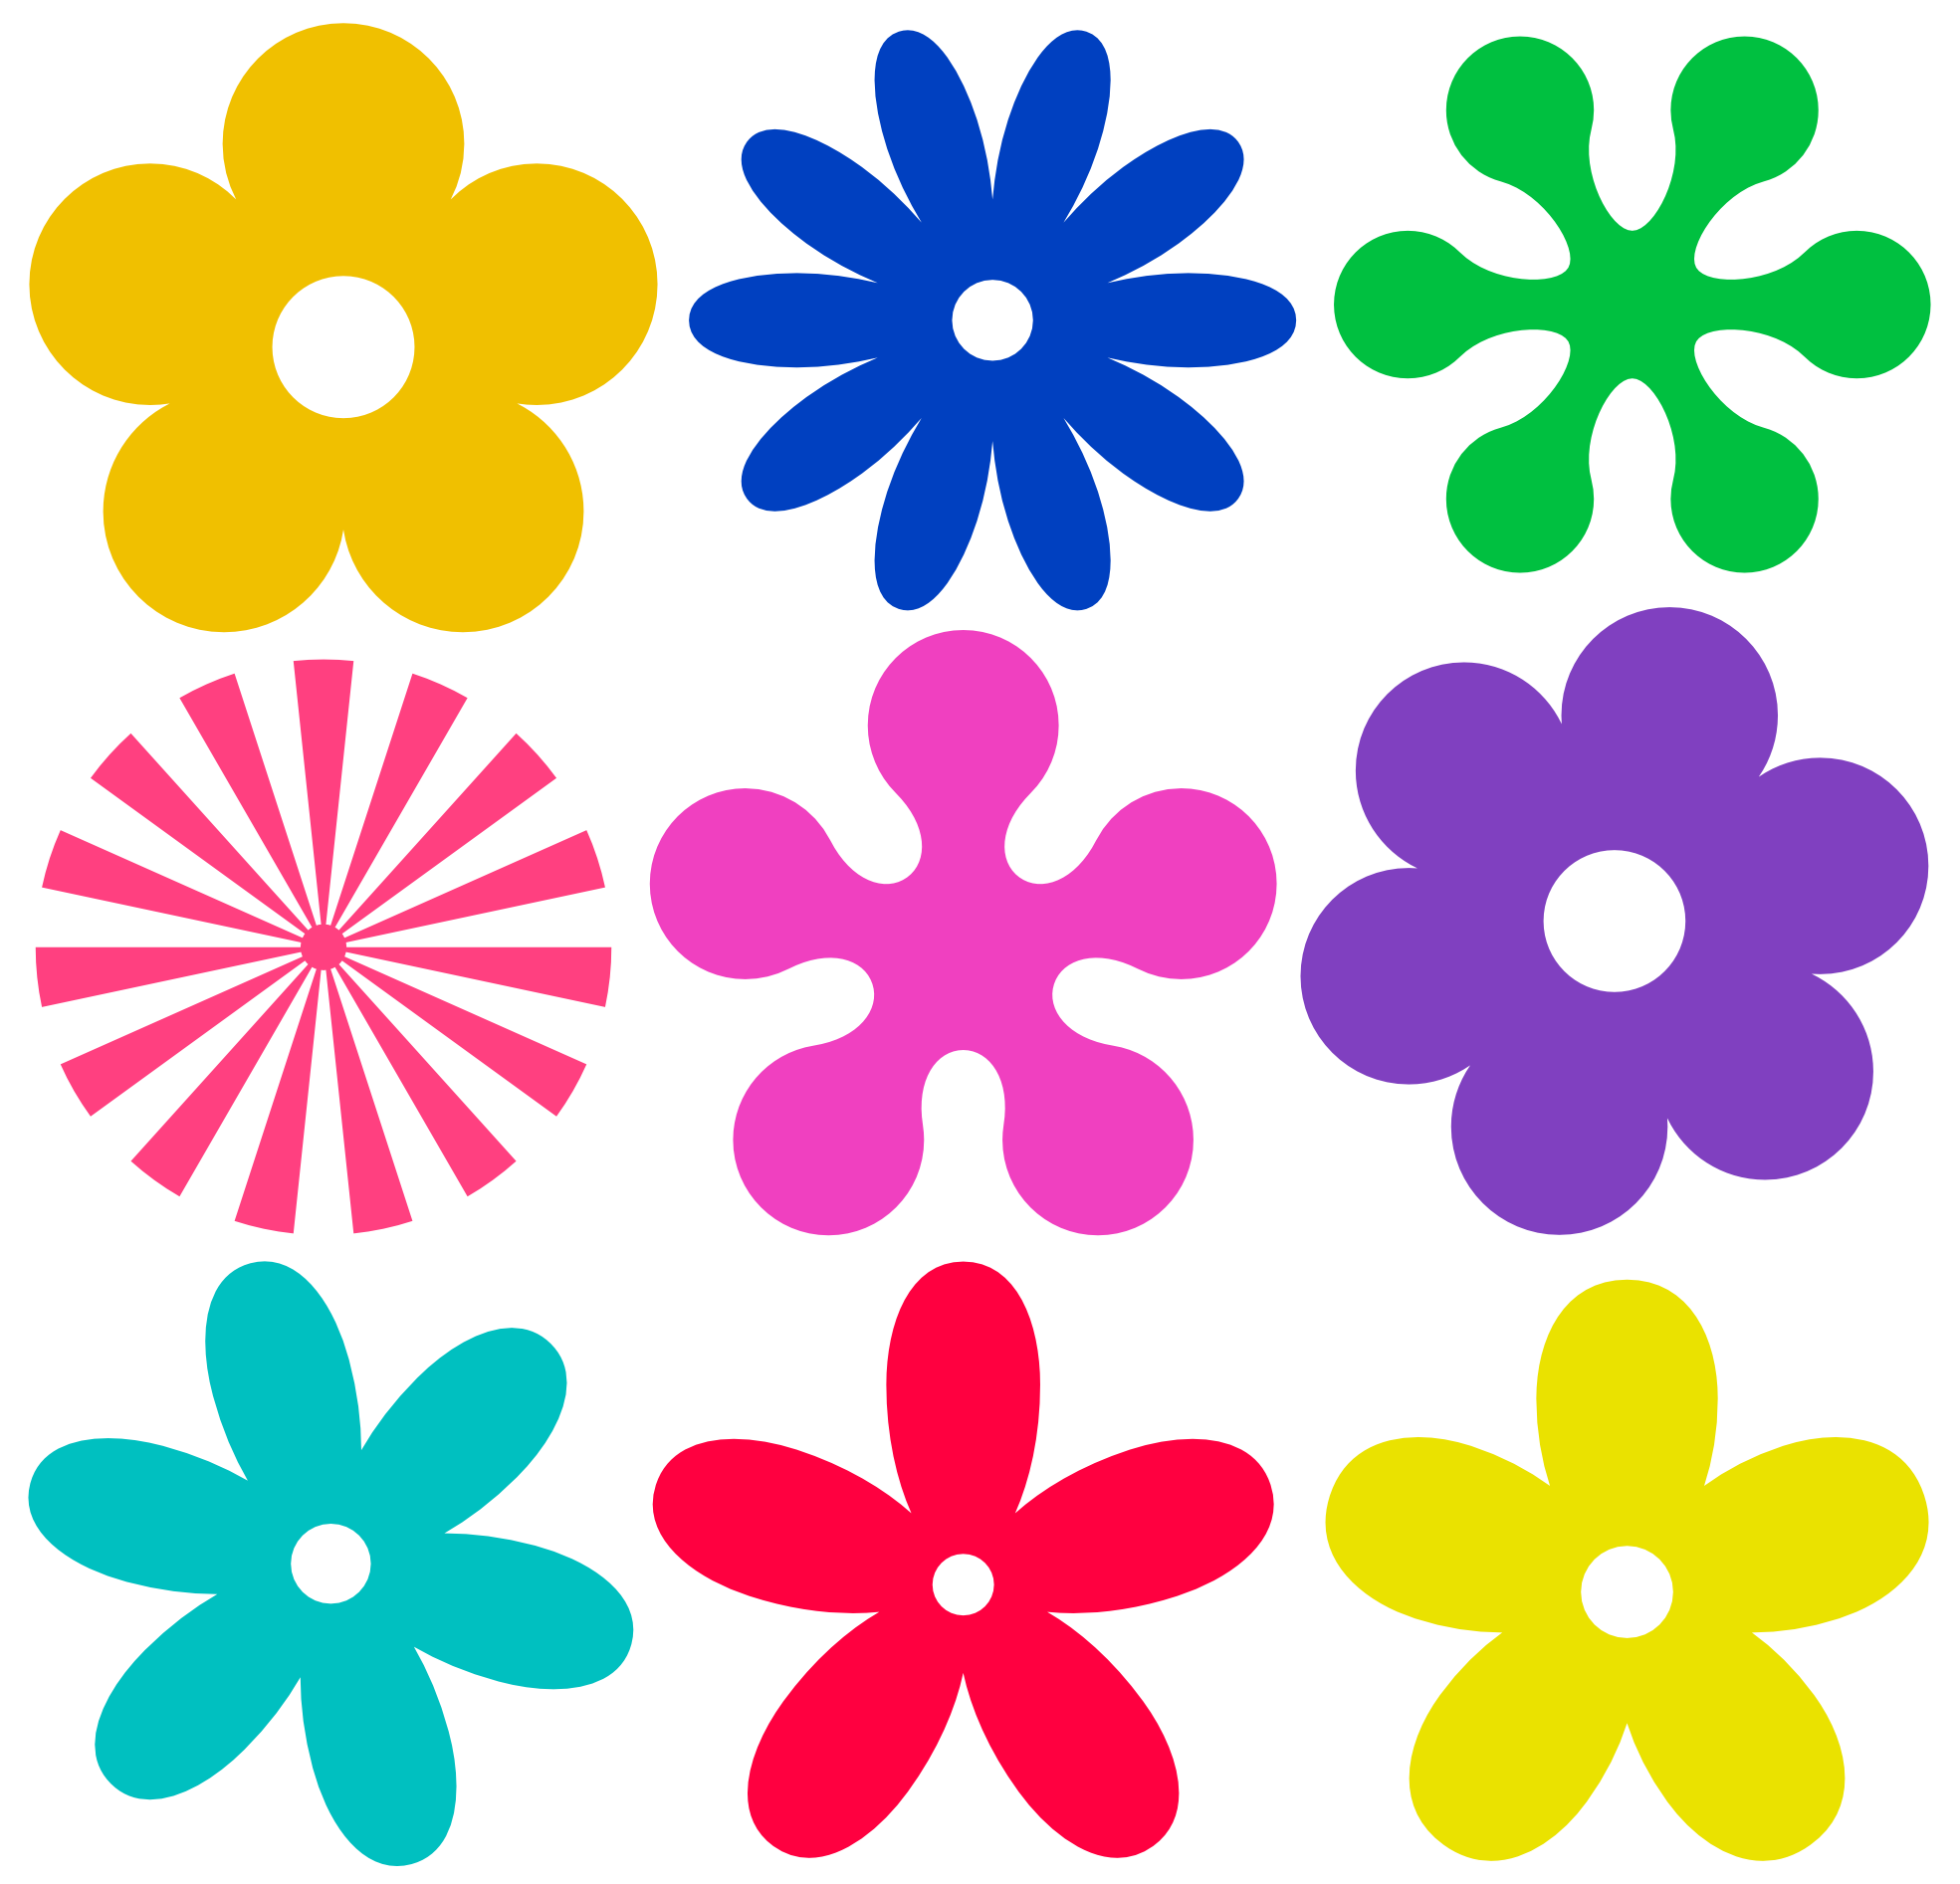 Flower Graphics Clip Art - Clipart library